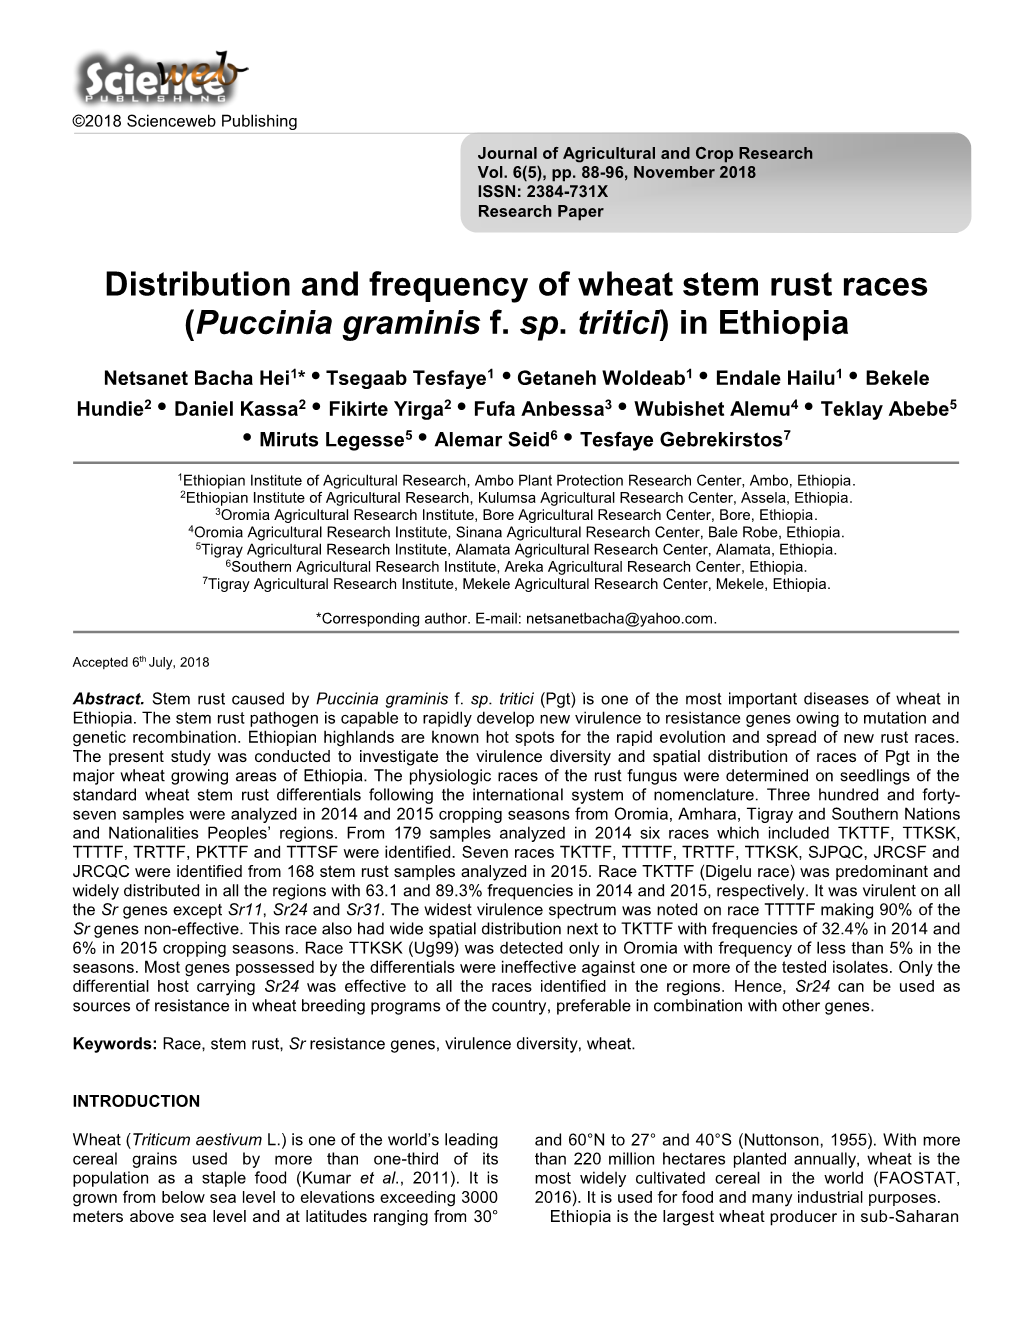 Distribution and Frequency of Wheat Stem Rust Races (Puccinia Graminis F